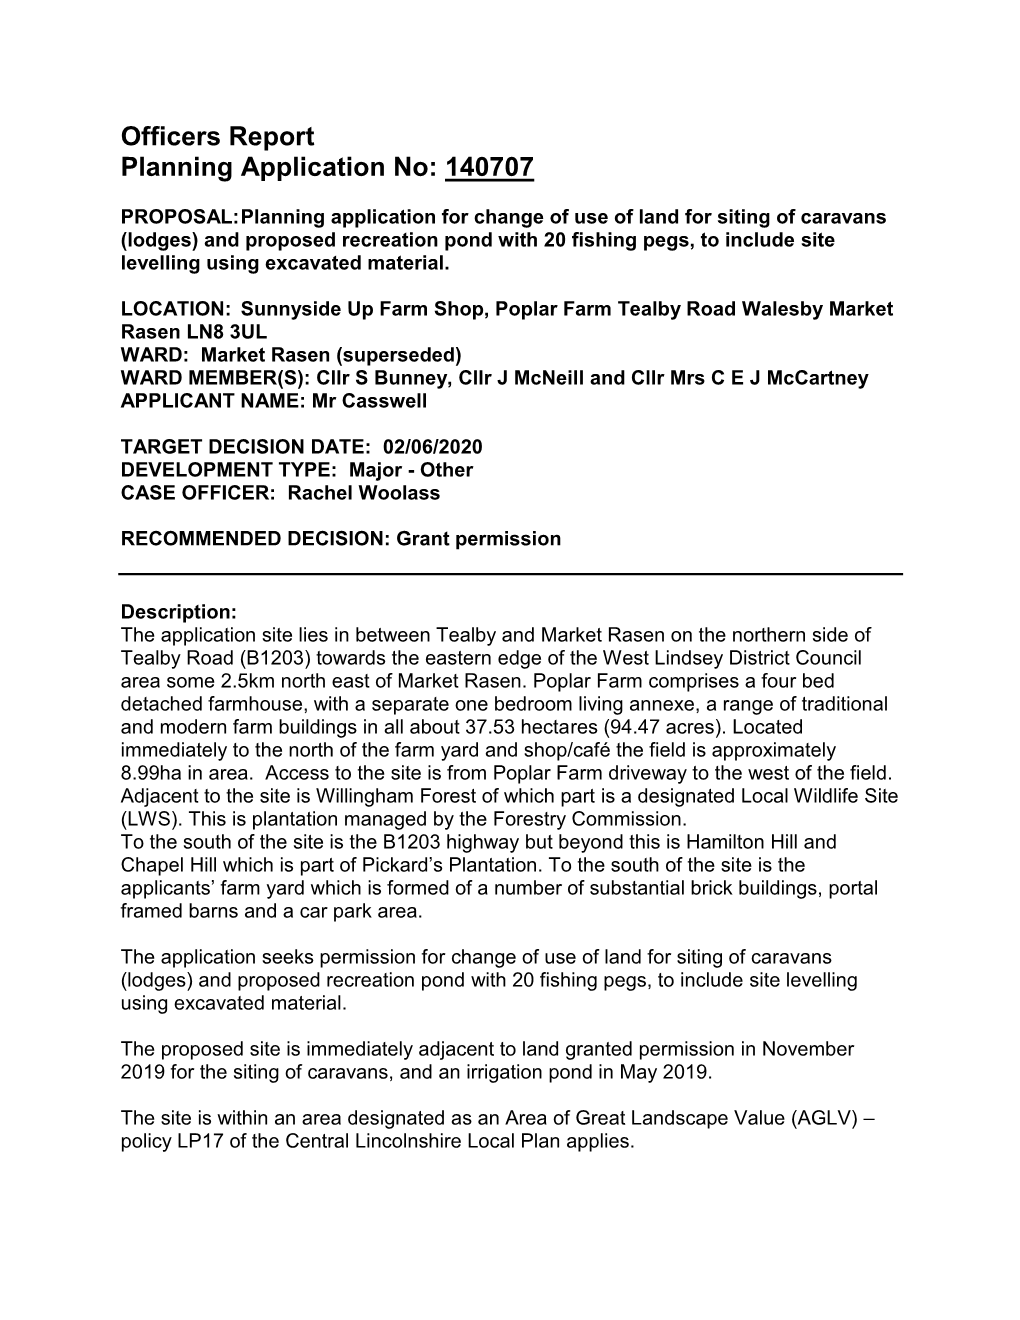 Officers Report Planning Application No: 140707